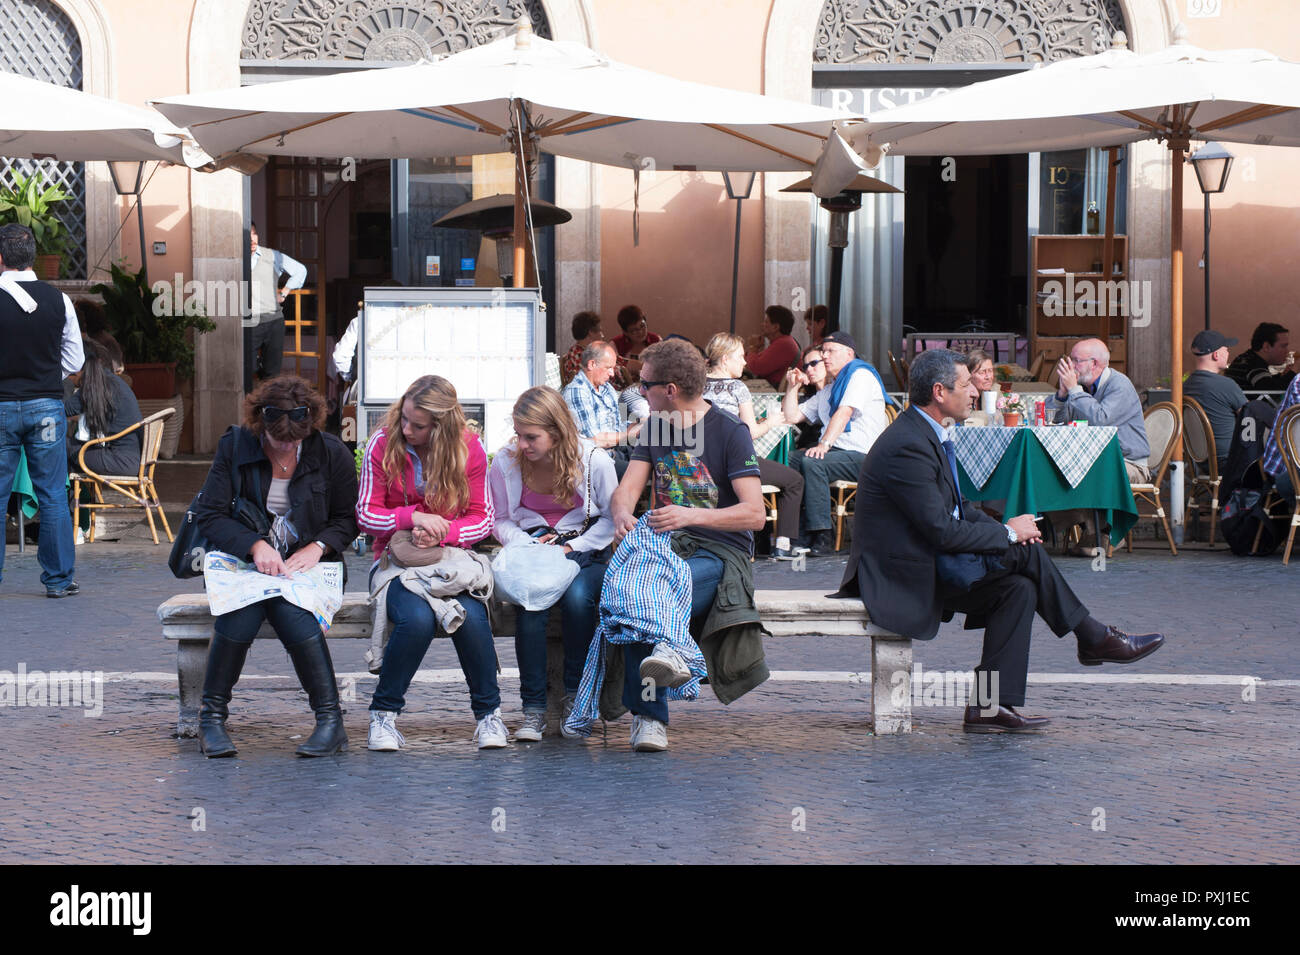 Sitting on the same bench, tourists consulting a map and lone elegant man smoking a cigarette, Piazza Navona, Rome. Stock Photo